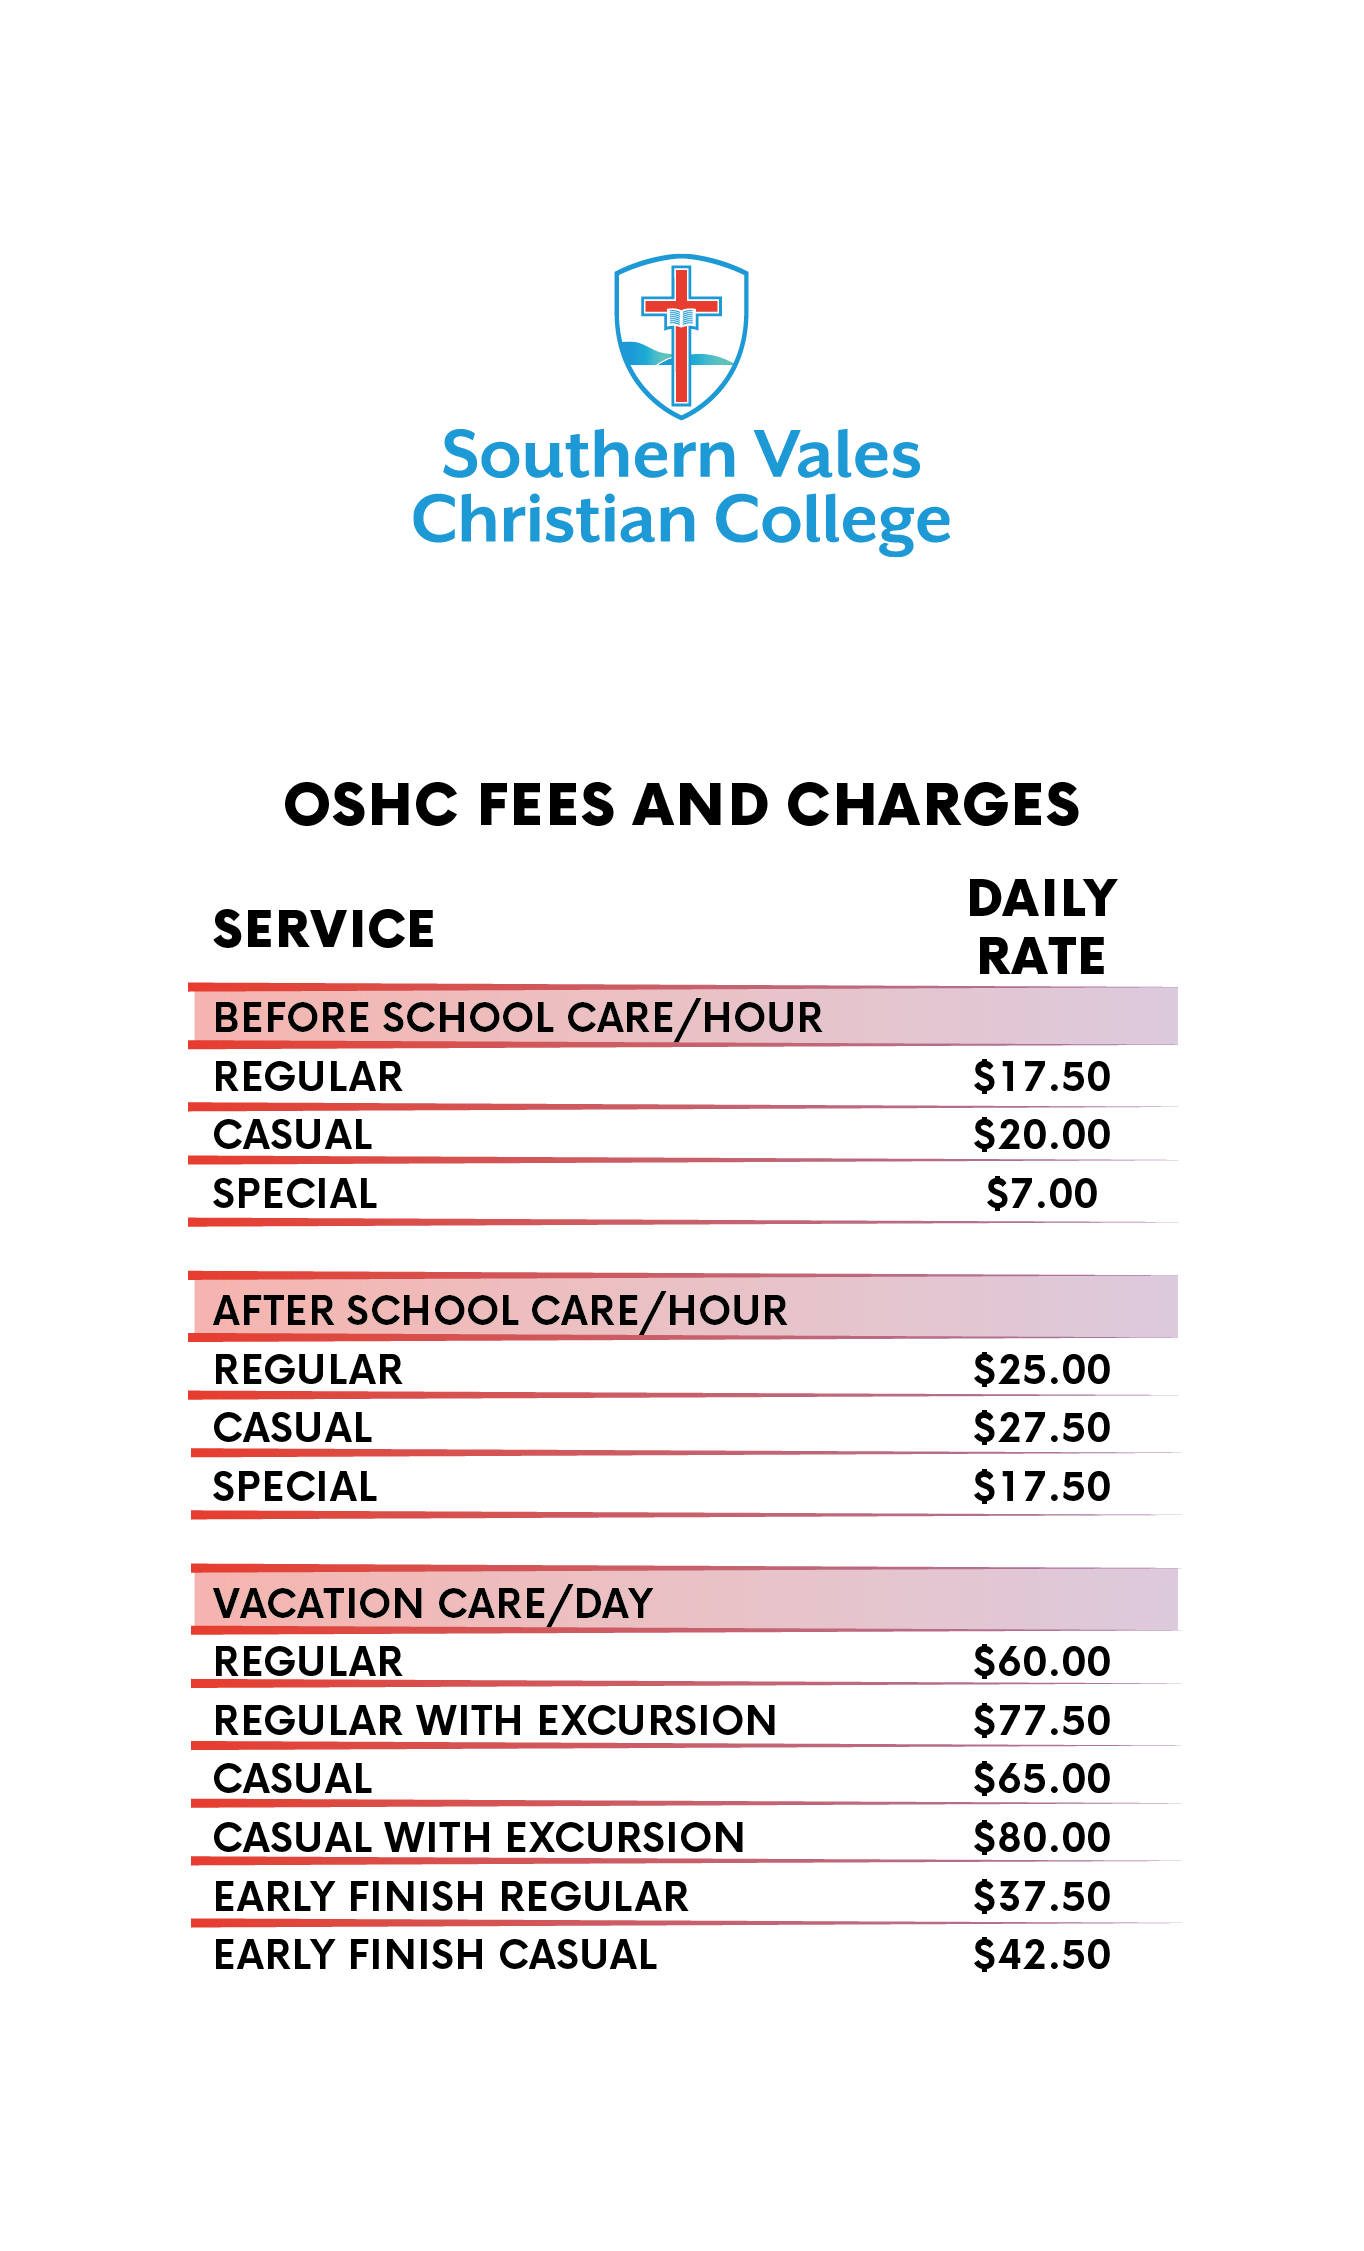 oshc-vacation-care-southern-vales-christian-college